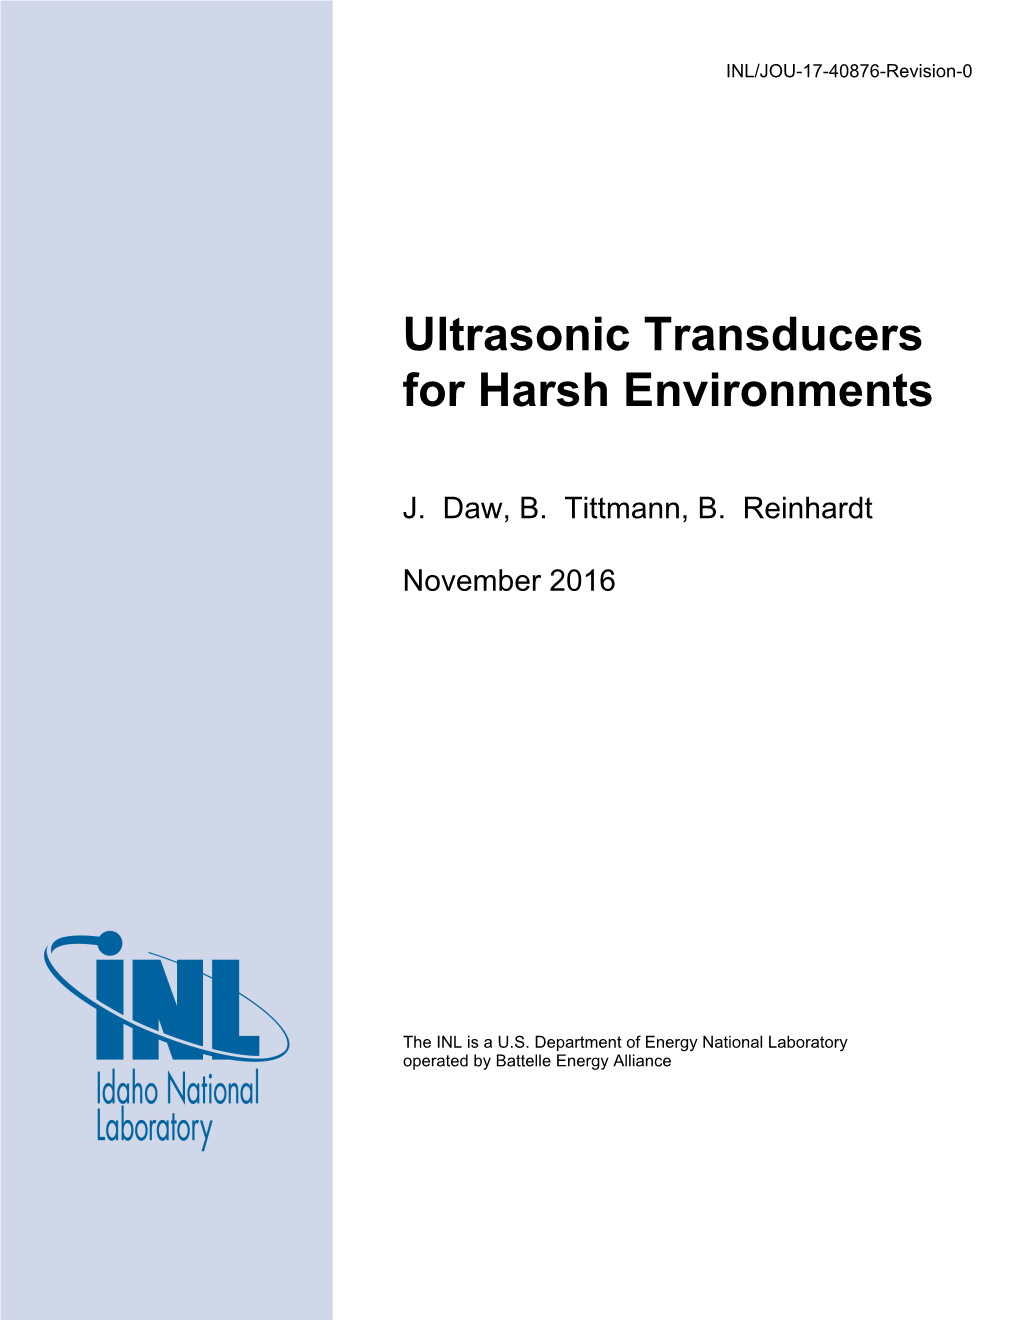 Ultrasonic Transducers for Harsh Environments